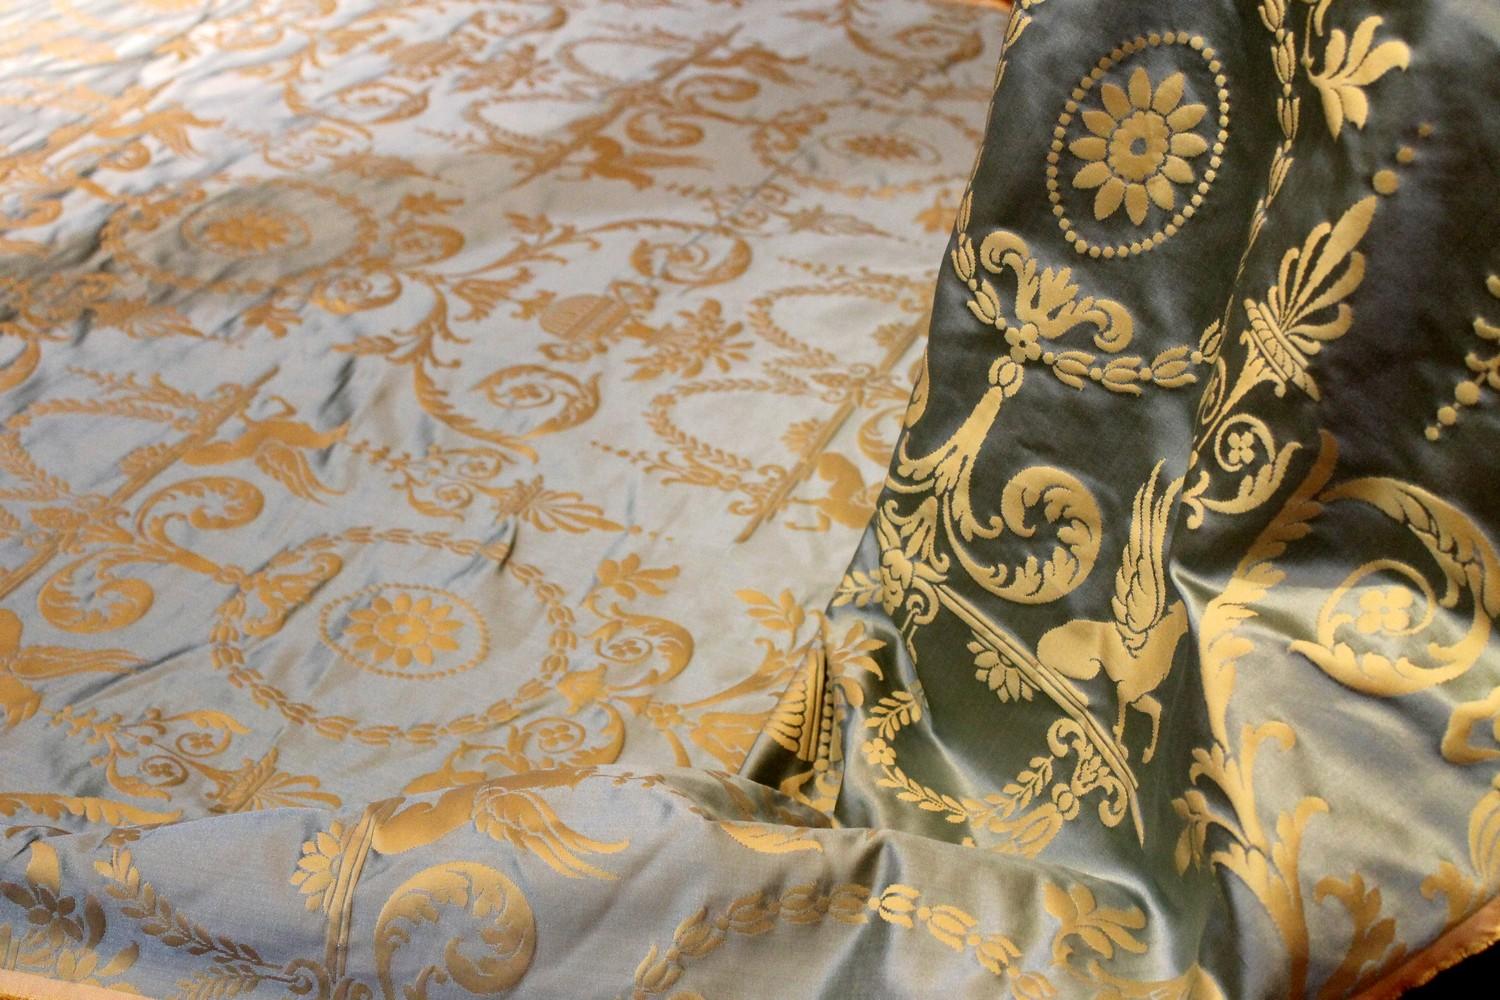 Italian Pure Silk Damask Fabric in Light Blue and Gold with Neoclassical Design 1